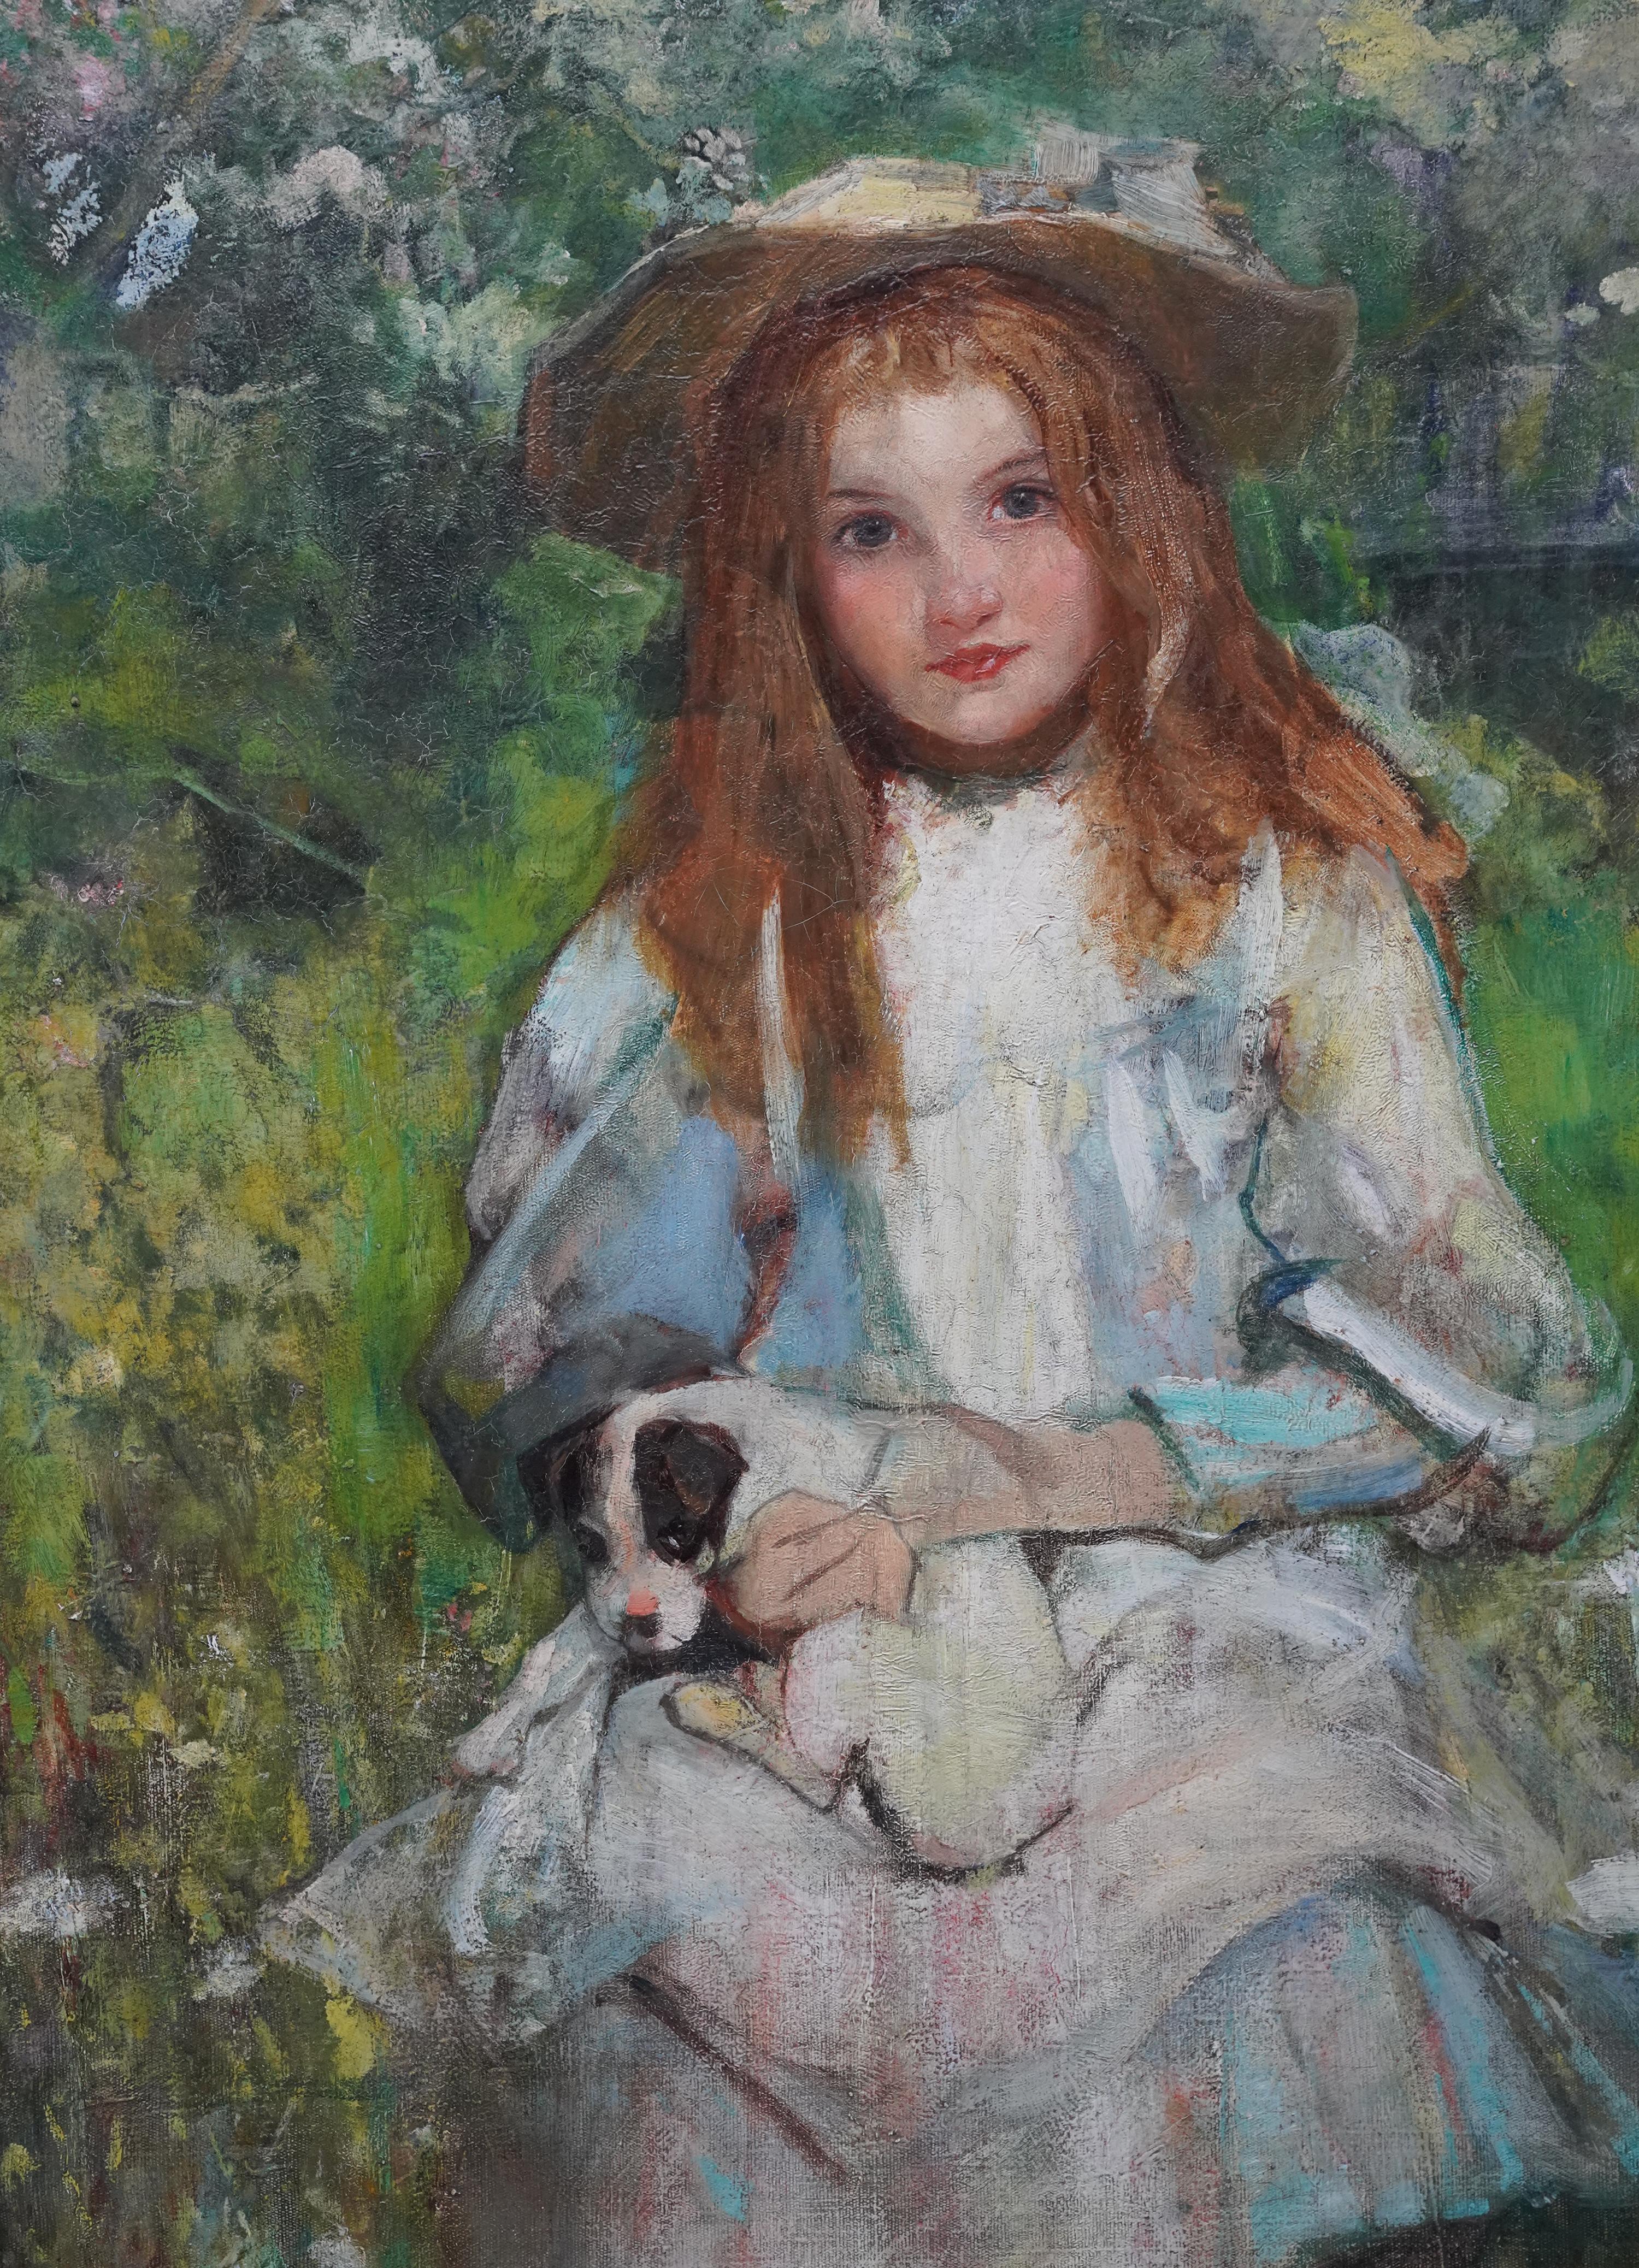 Portrait of a Girl with a Puppy - Scottish Edwardian art portrait oil painting - Realist Painting by William Stewart MacGeorge